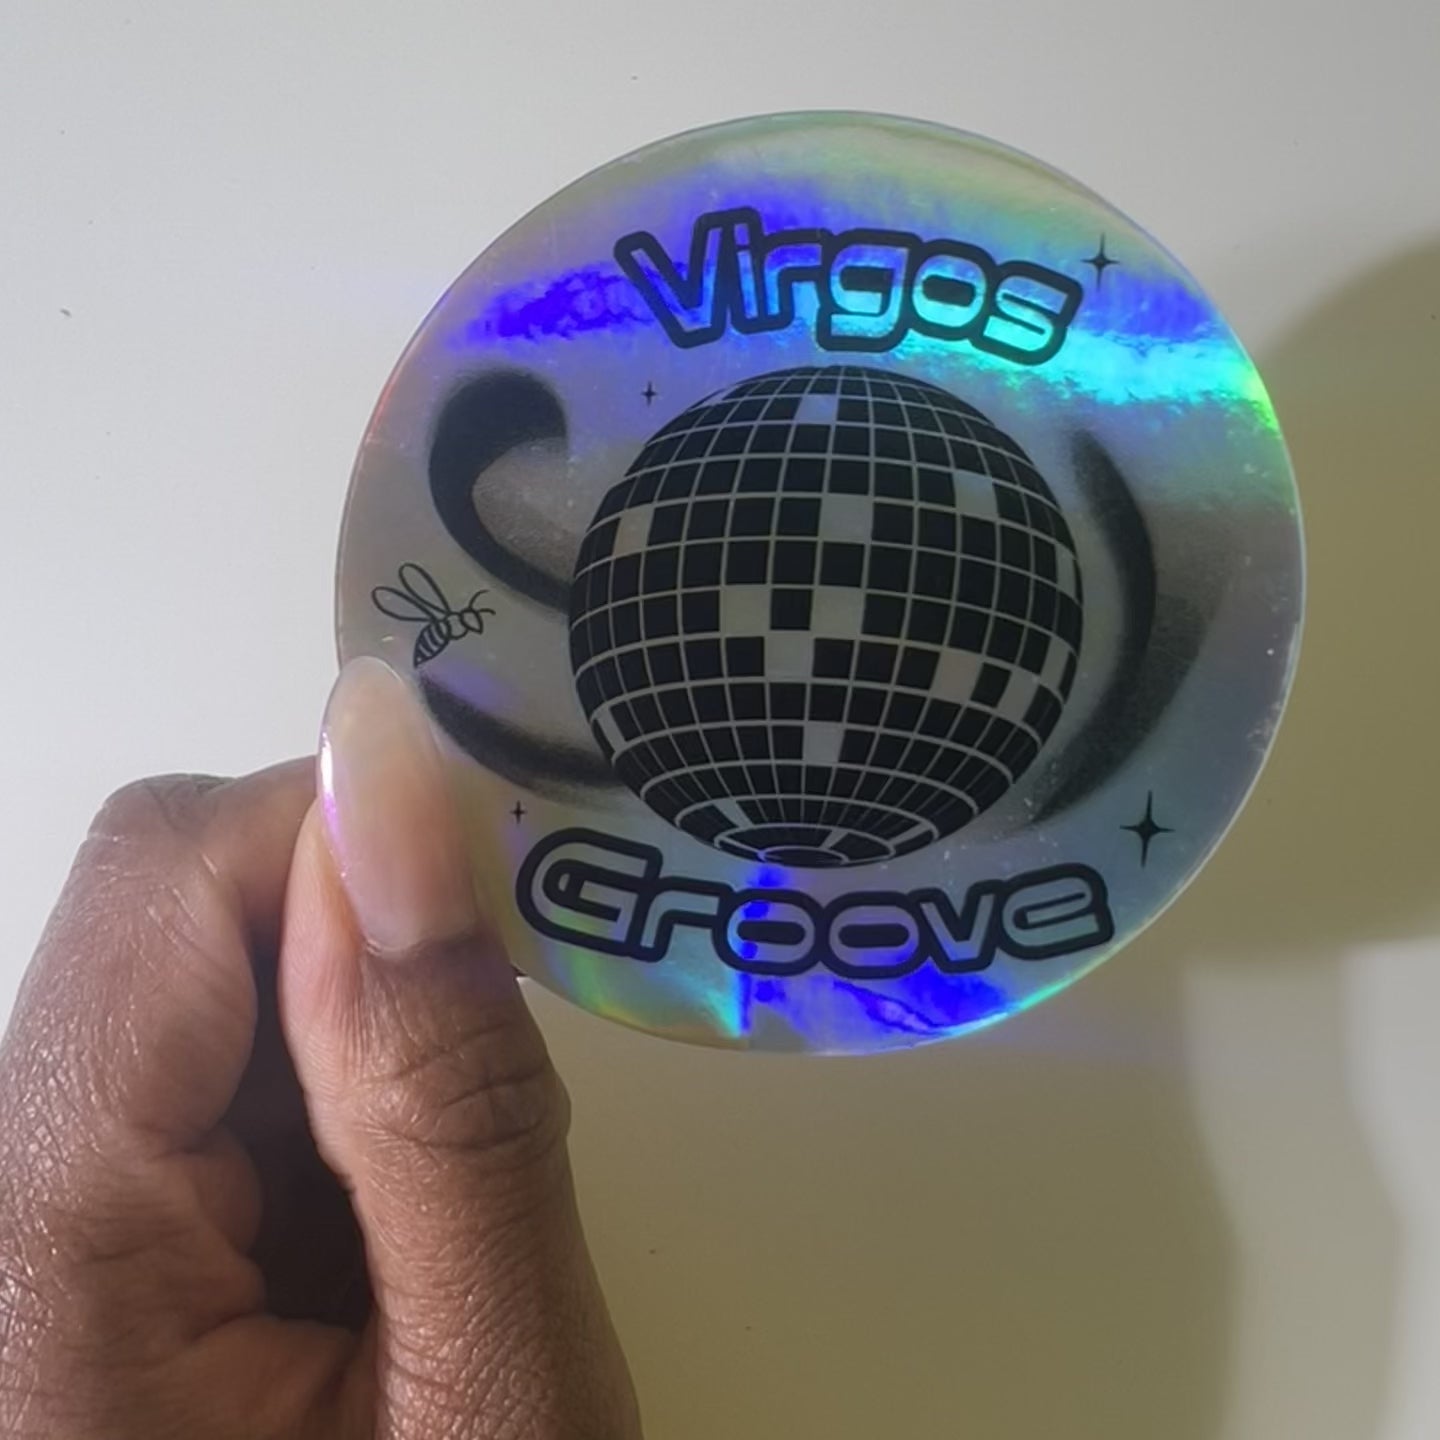 3 x 3” holographic waterproof sticker with a disco ball and the words ‘Virgo’s Groove’. A bee floats around the disco ball symbolizing Beyoncé’s bey-hive.High quality vinyl waterproof and scratch resistant sticker from Goods Made By Digitrillnana. Perfect for laptops, water bottles, phone cases, luggage, journals, and more! Black Woman Owned.